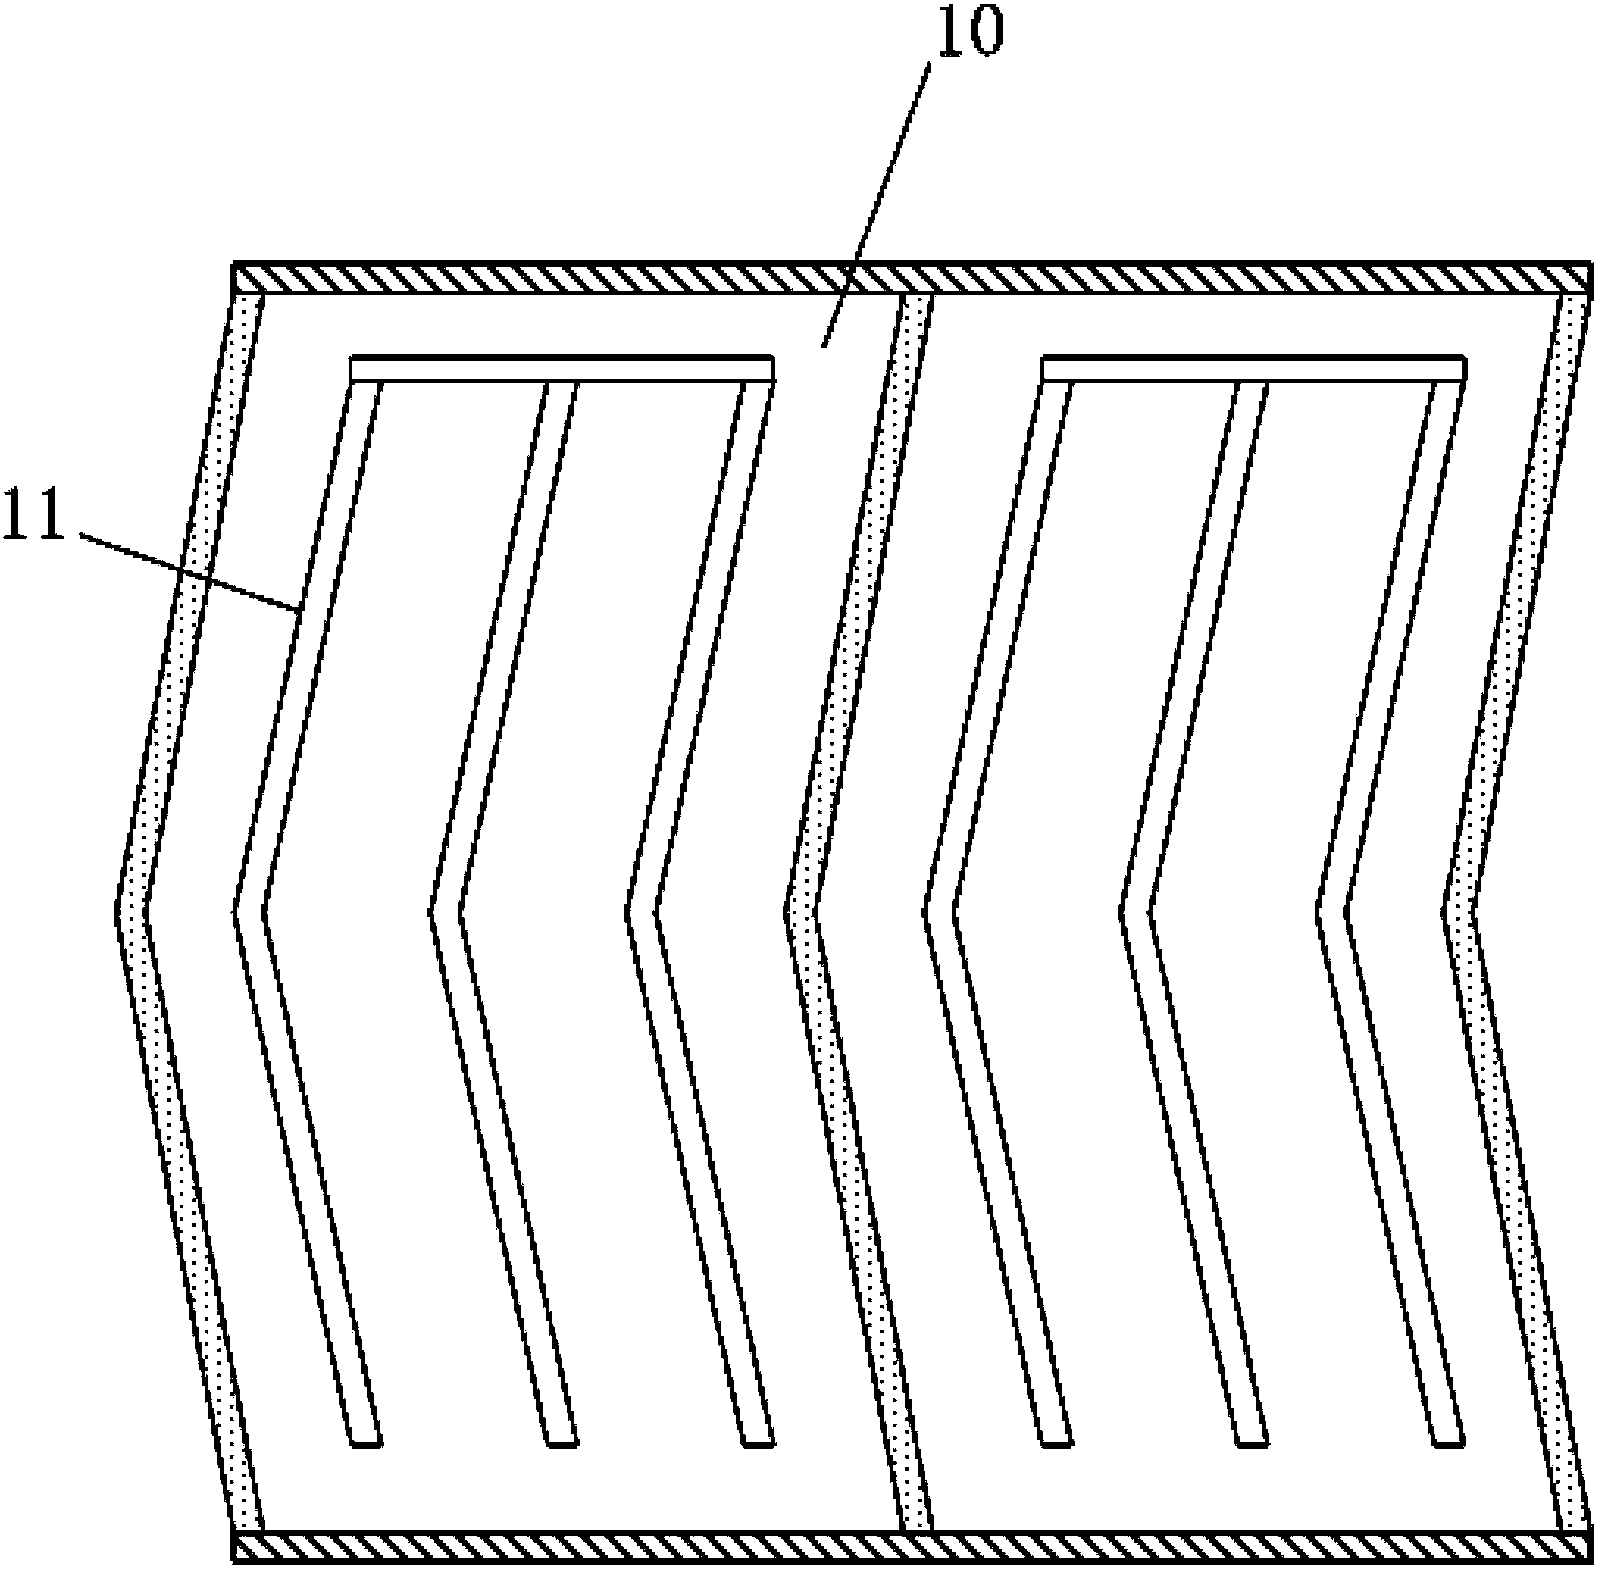 Pixel unit and array substrate for fringe switching mode liquid crystal display device